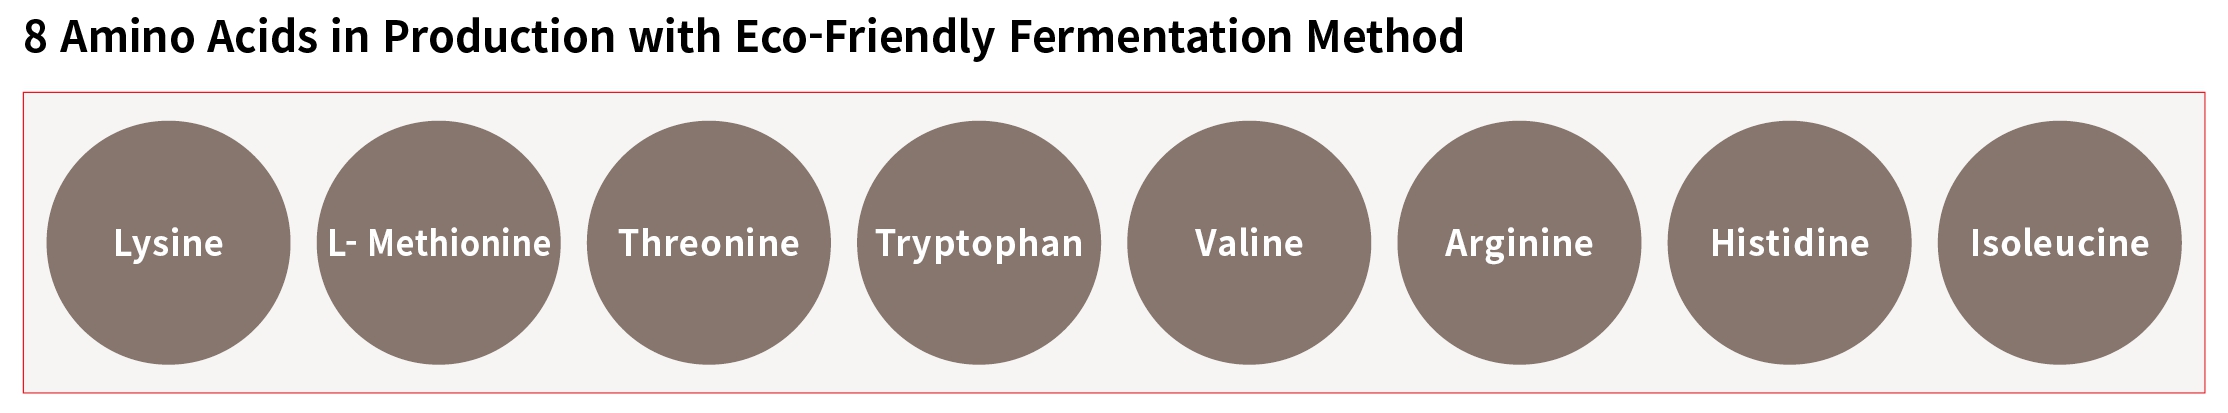 8 Anmino Acids in production with eco-friendly fermentation method